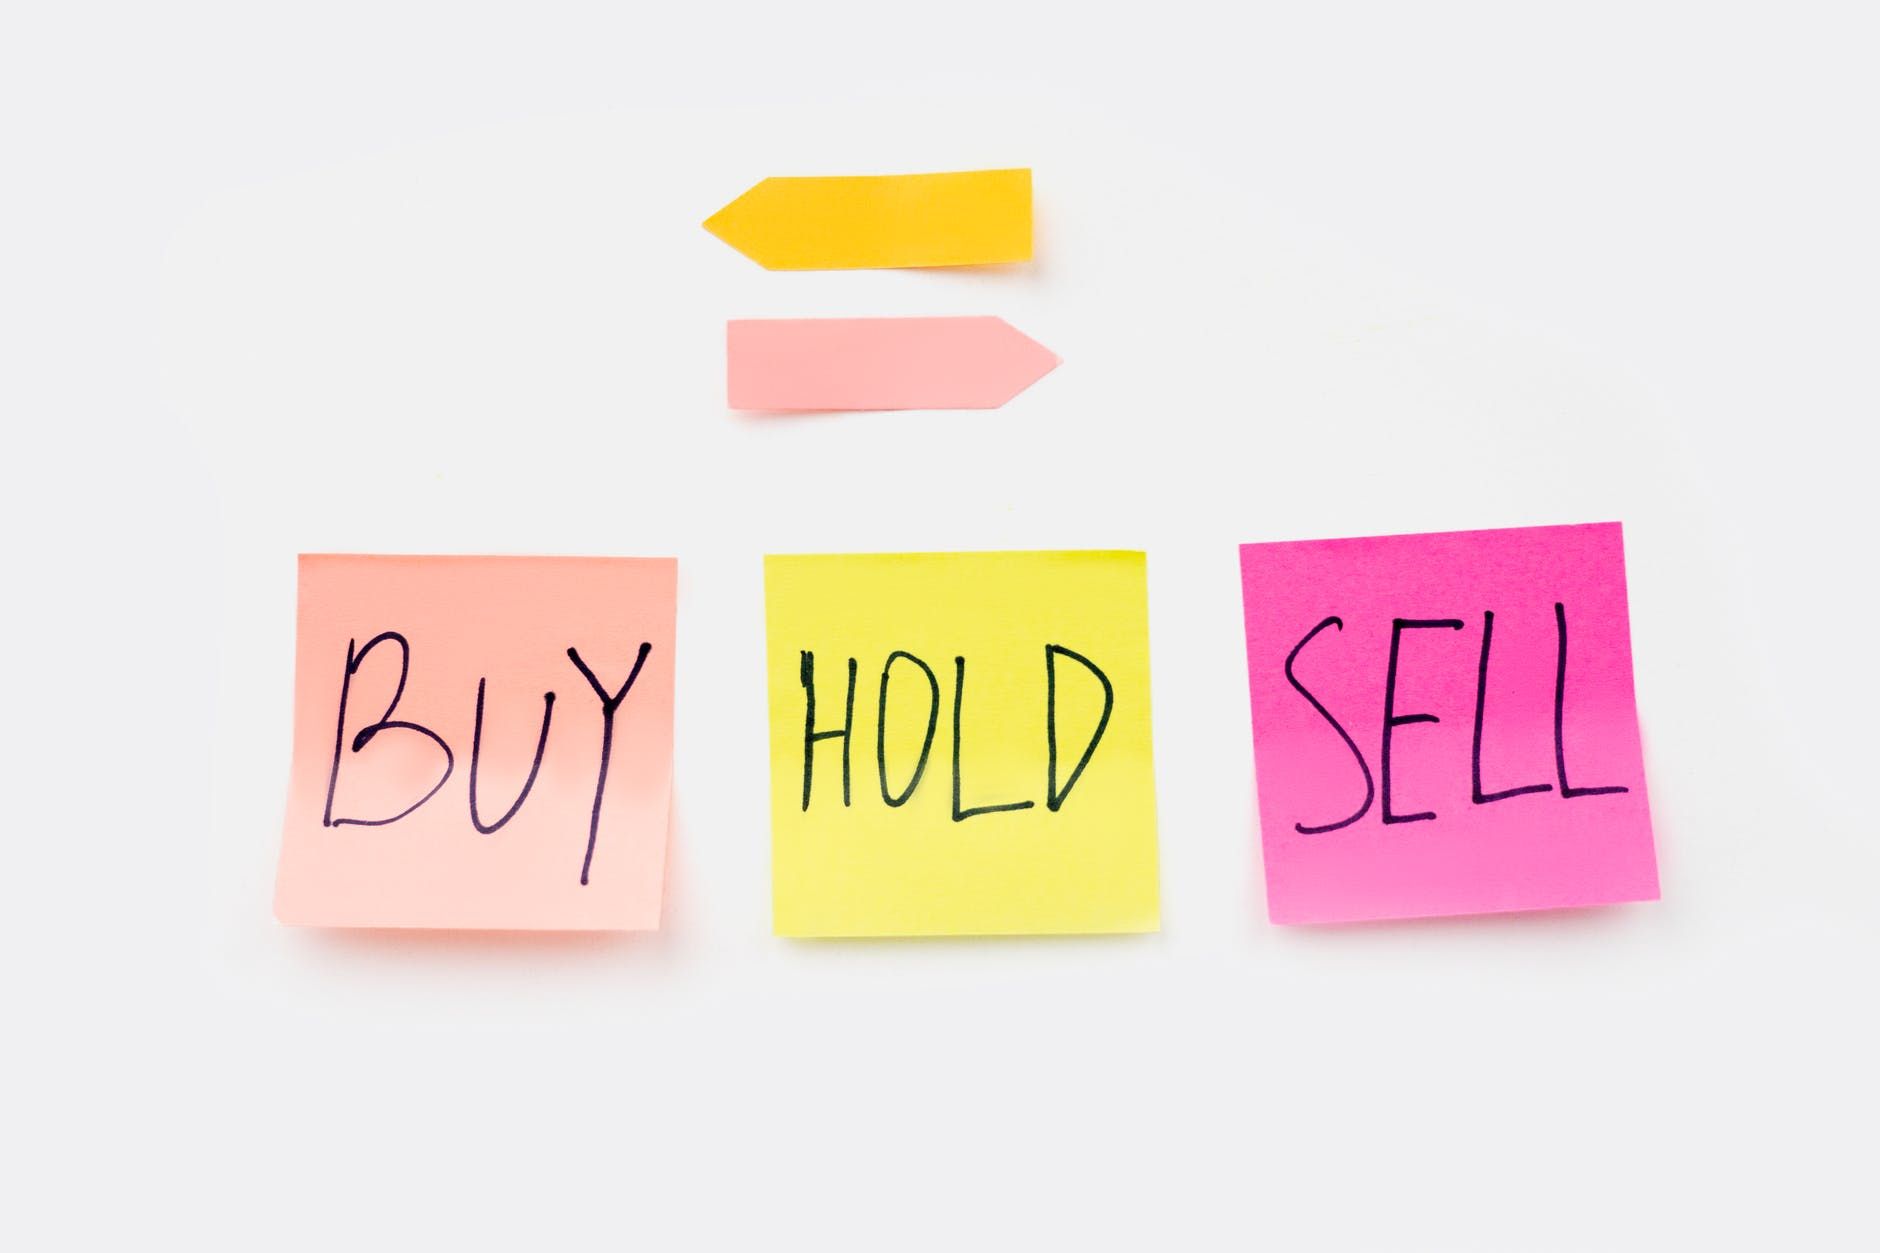 buy, hold, and sell on post-it notes